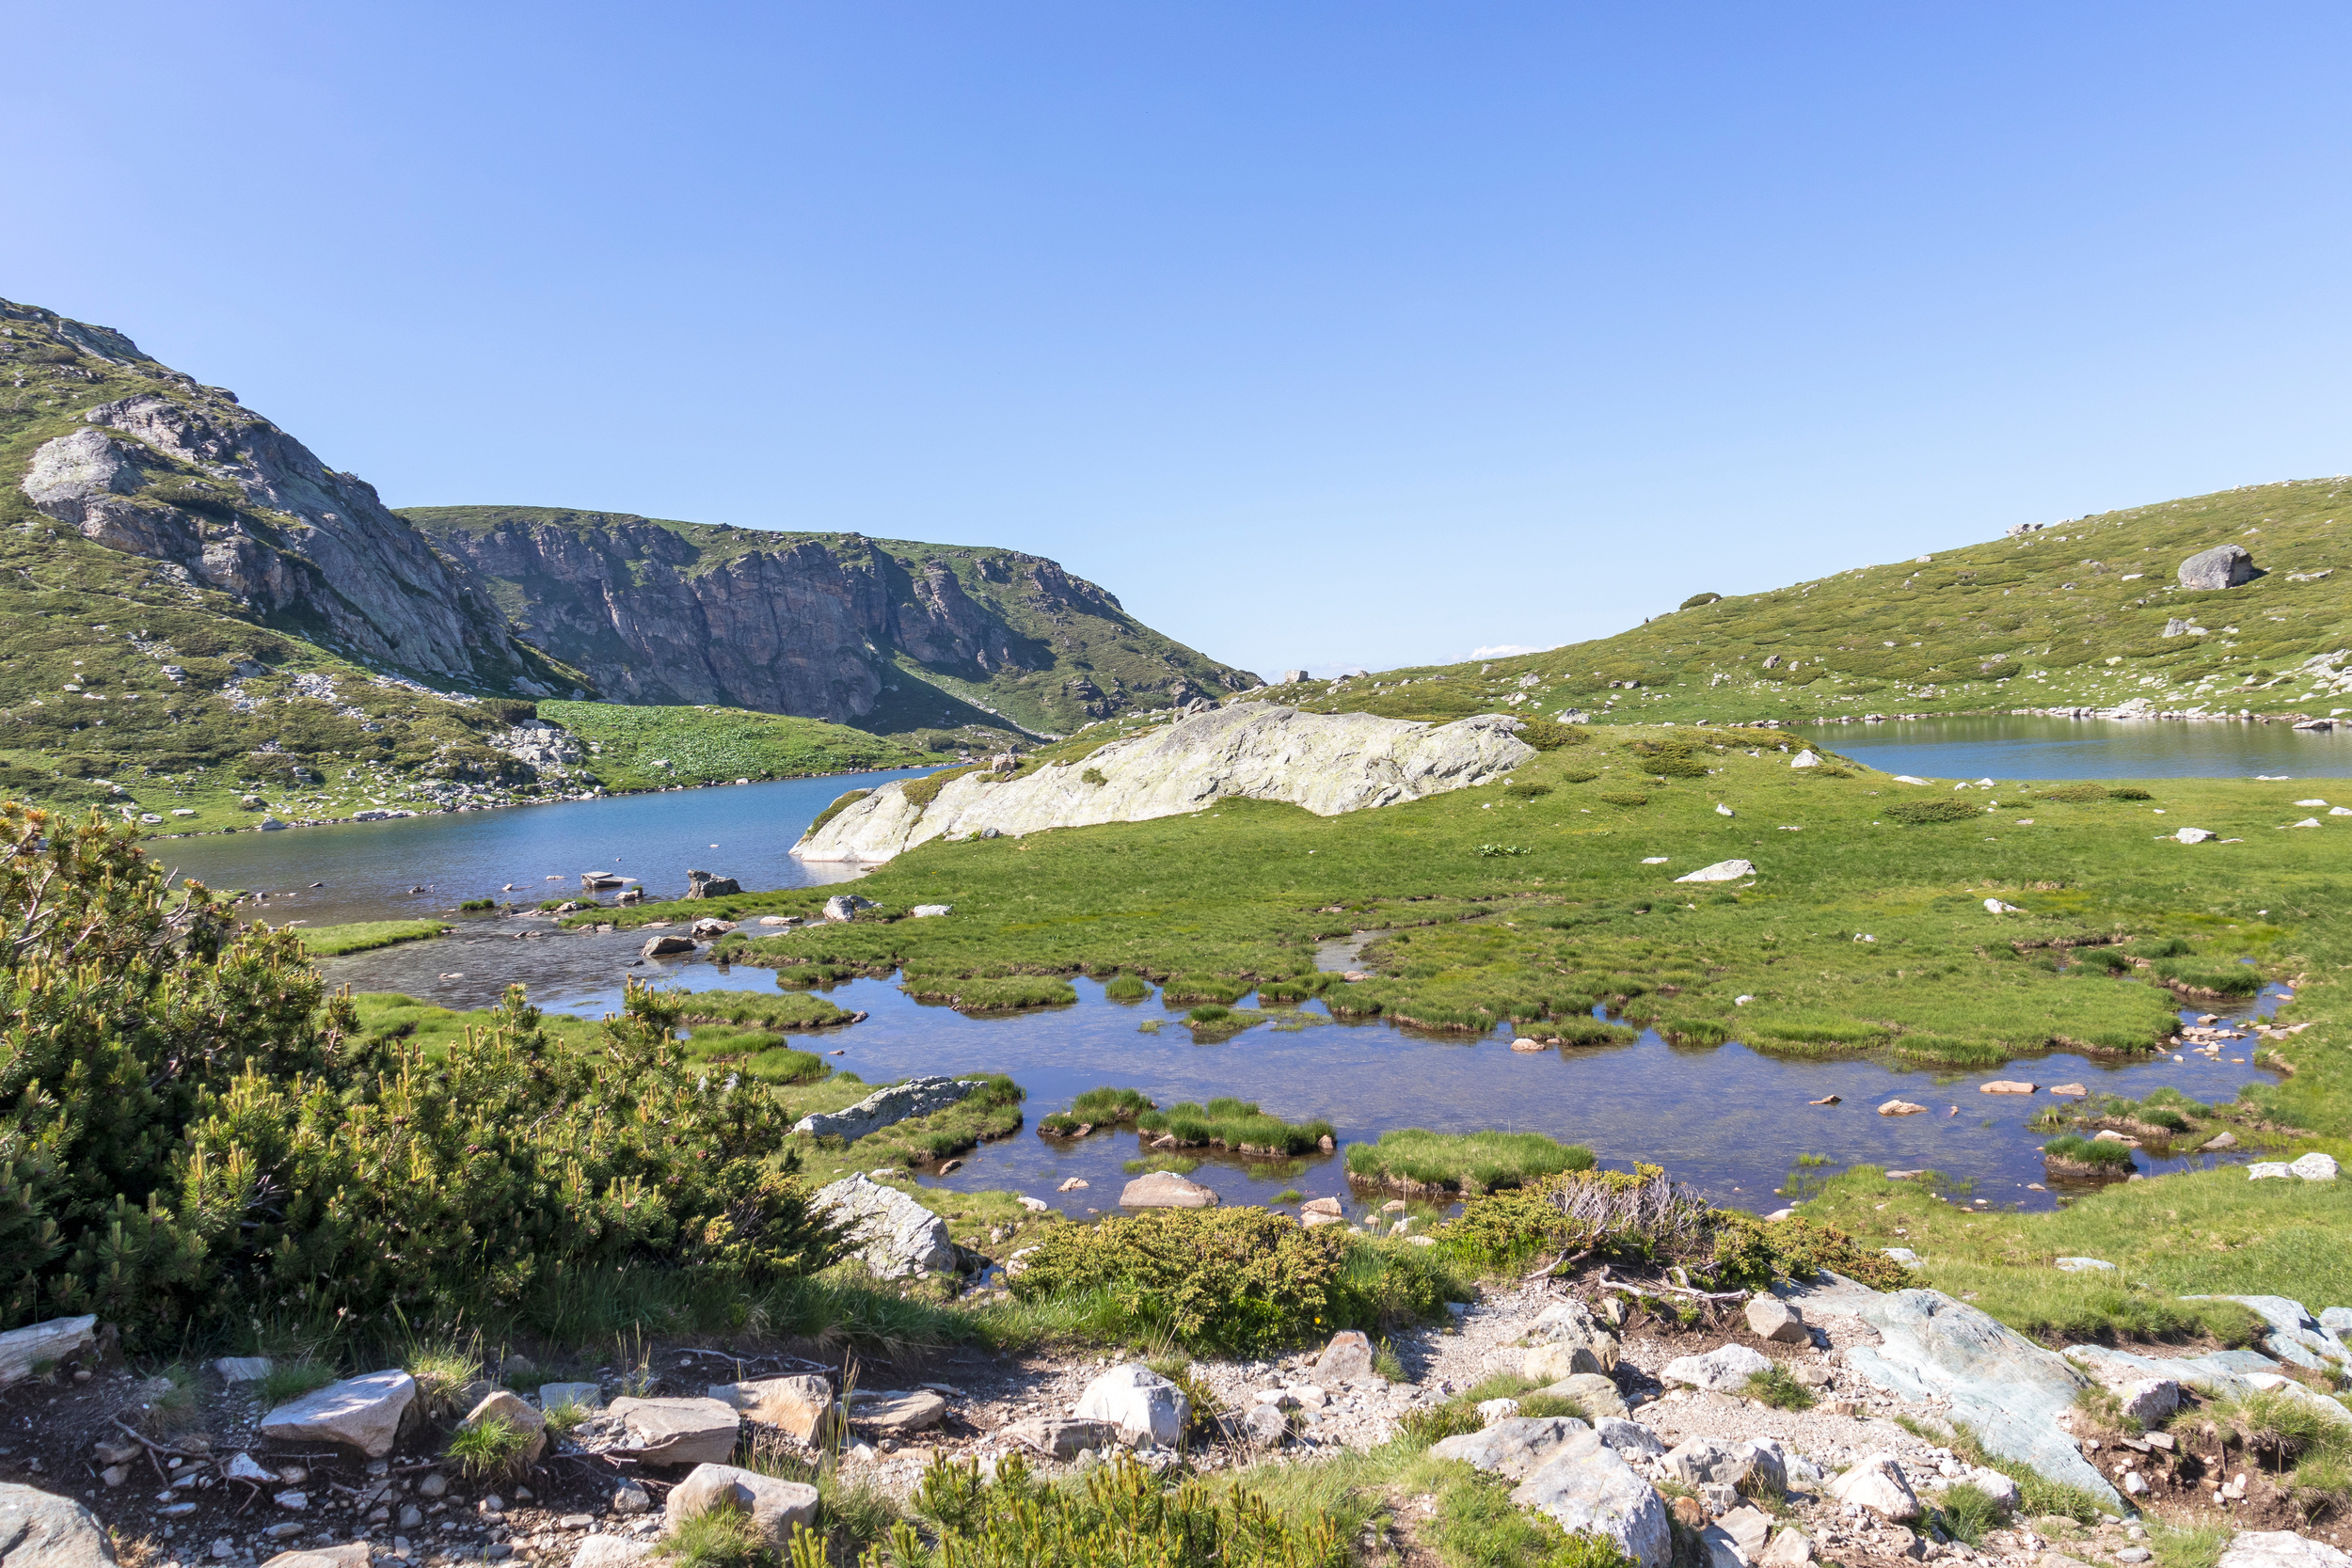 <p>Glacial lakes might not be what typically comes to mind when you think of Bulgaria, but these natural wonders are just a couple of hours from the capital. Set amongst the Rila Mountains, they make a perfect nature escape for a day of hiking or just cooling off far from the city.</p><p><a href='https://www.msn.com/en-us/community/channel/vid-cj9pqbr0vn9in2b6ddcd8sfgpfq6x6utp44fssrv6mc2gtybw0us'>Follow us on MSN to see more of our exclusive lifestyle content.</a></p>